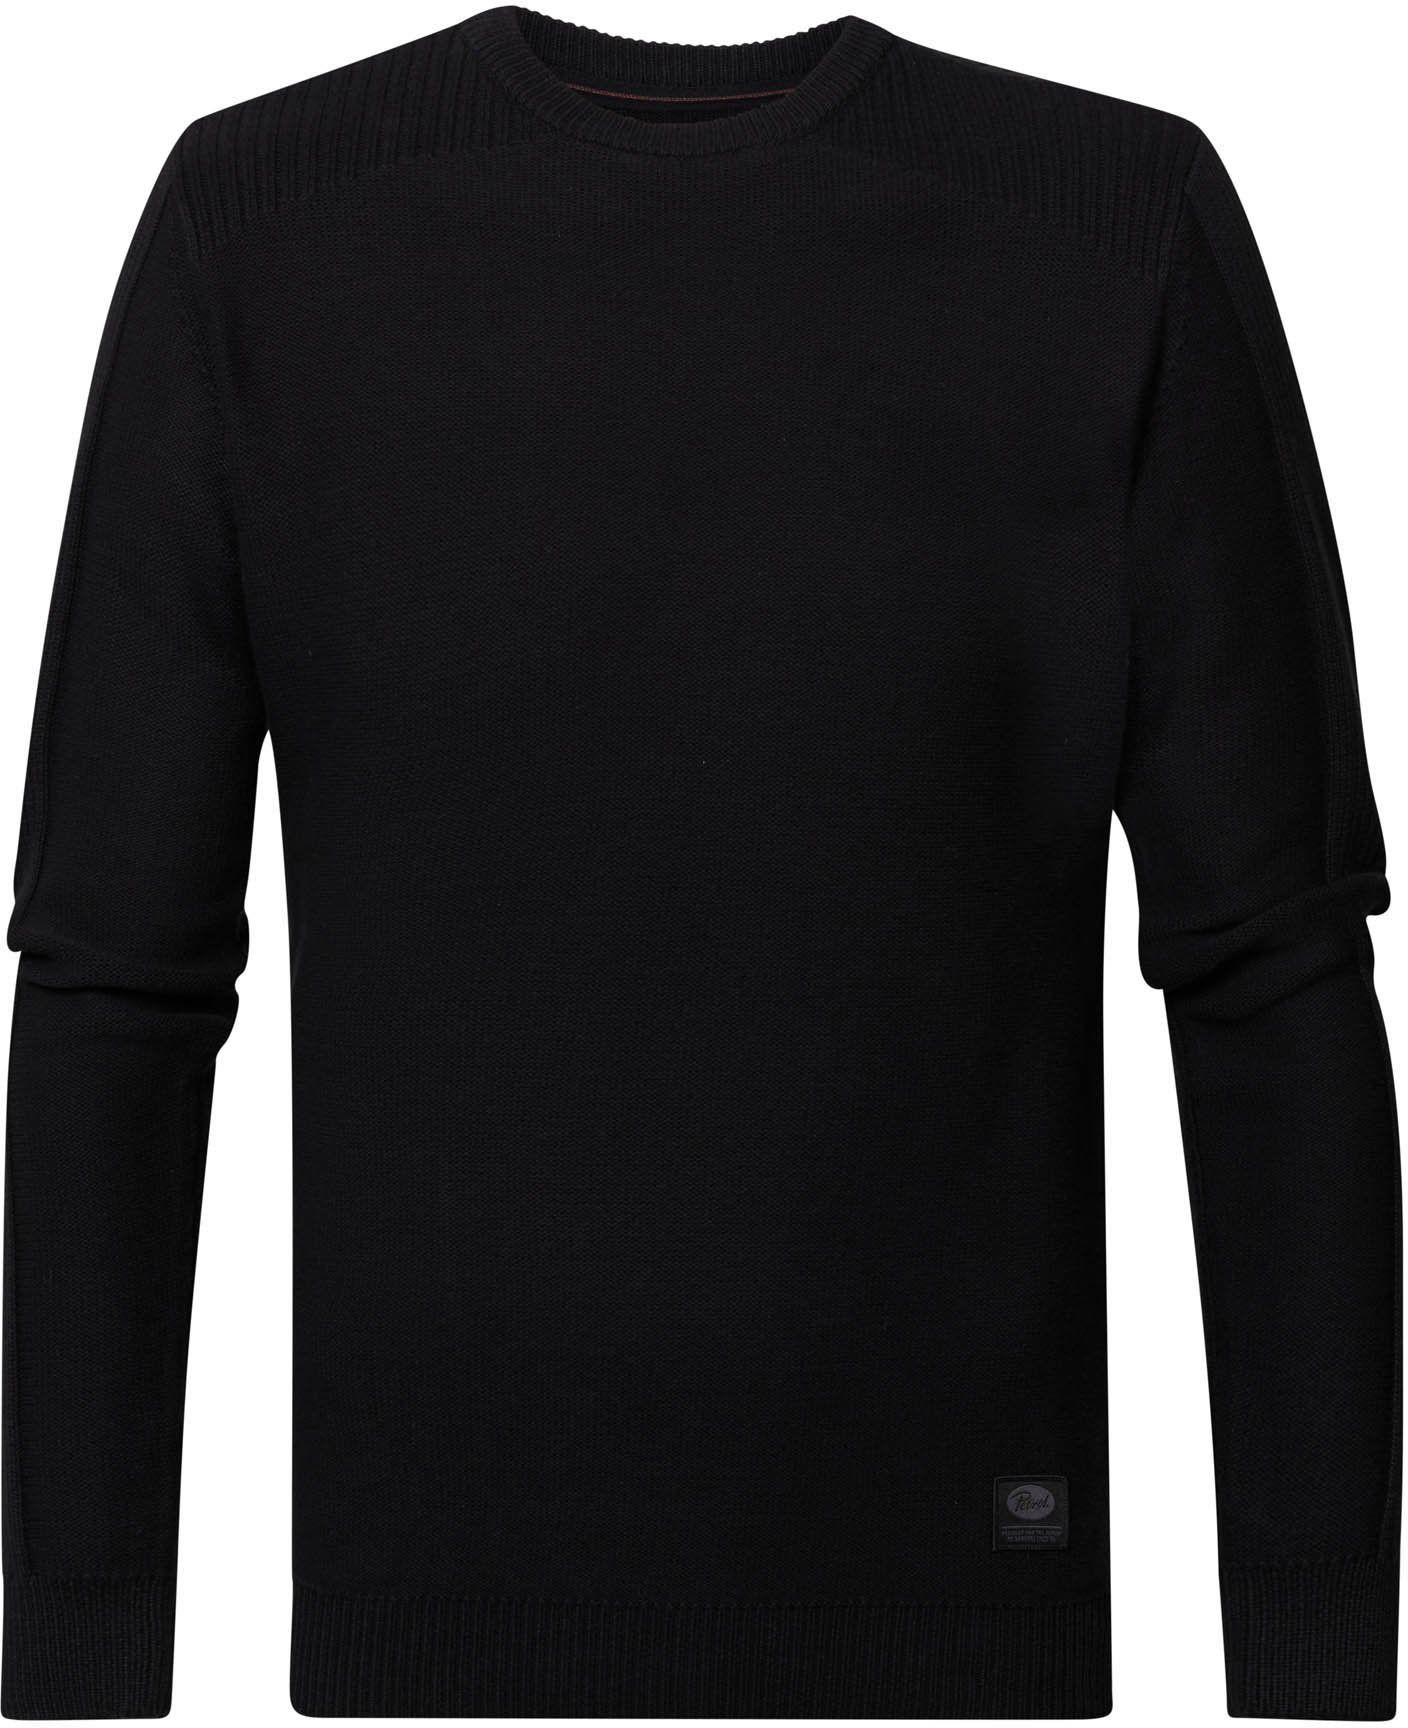 Petrol Sweater Knitted Black size 3XL